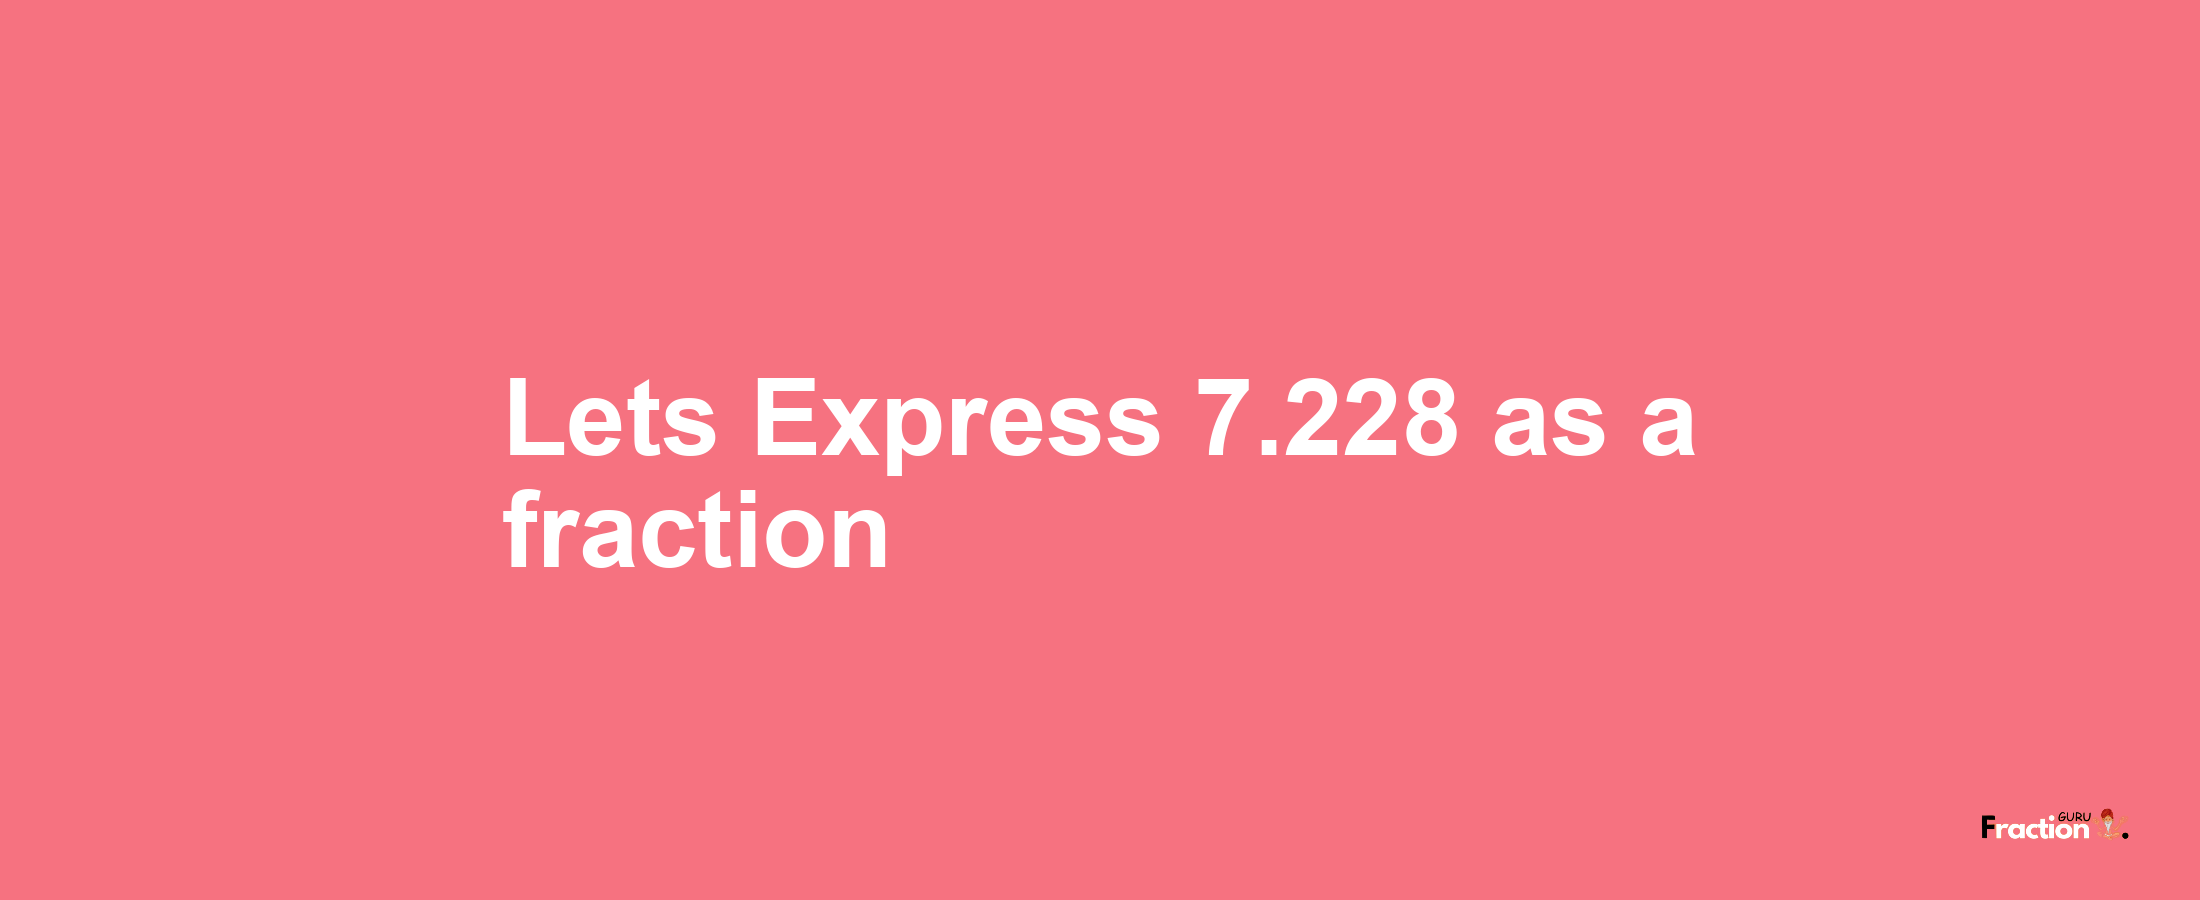 Lets Express 7.228 as afraction